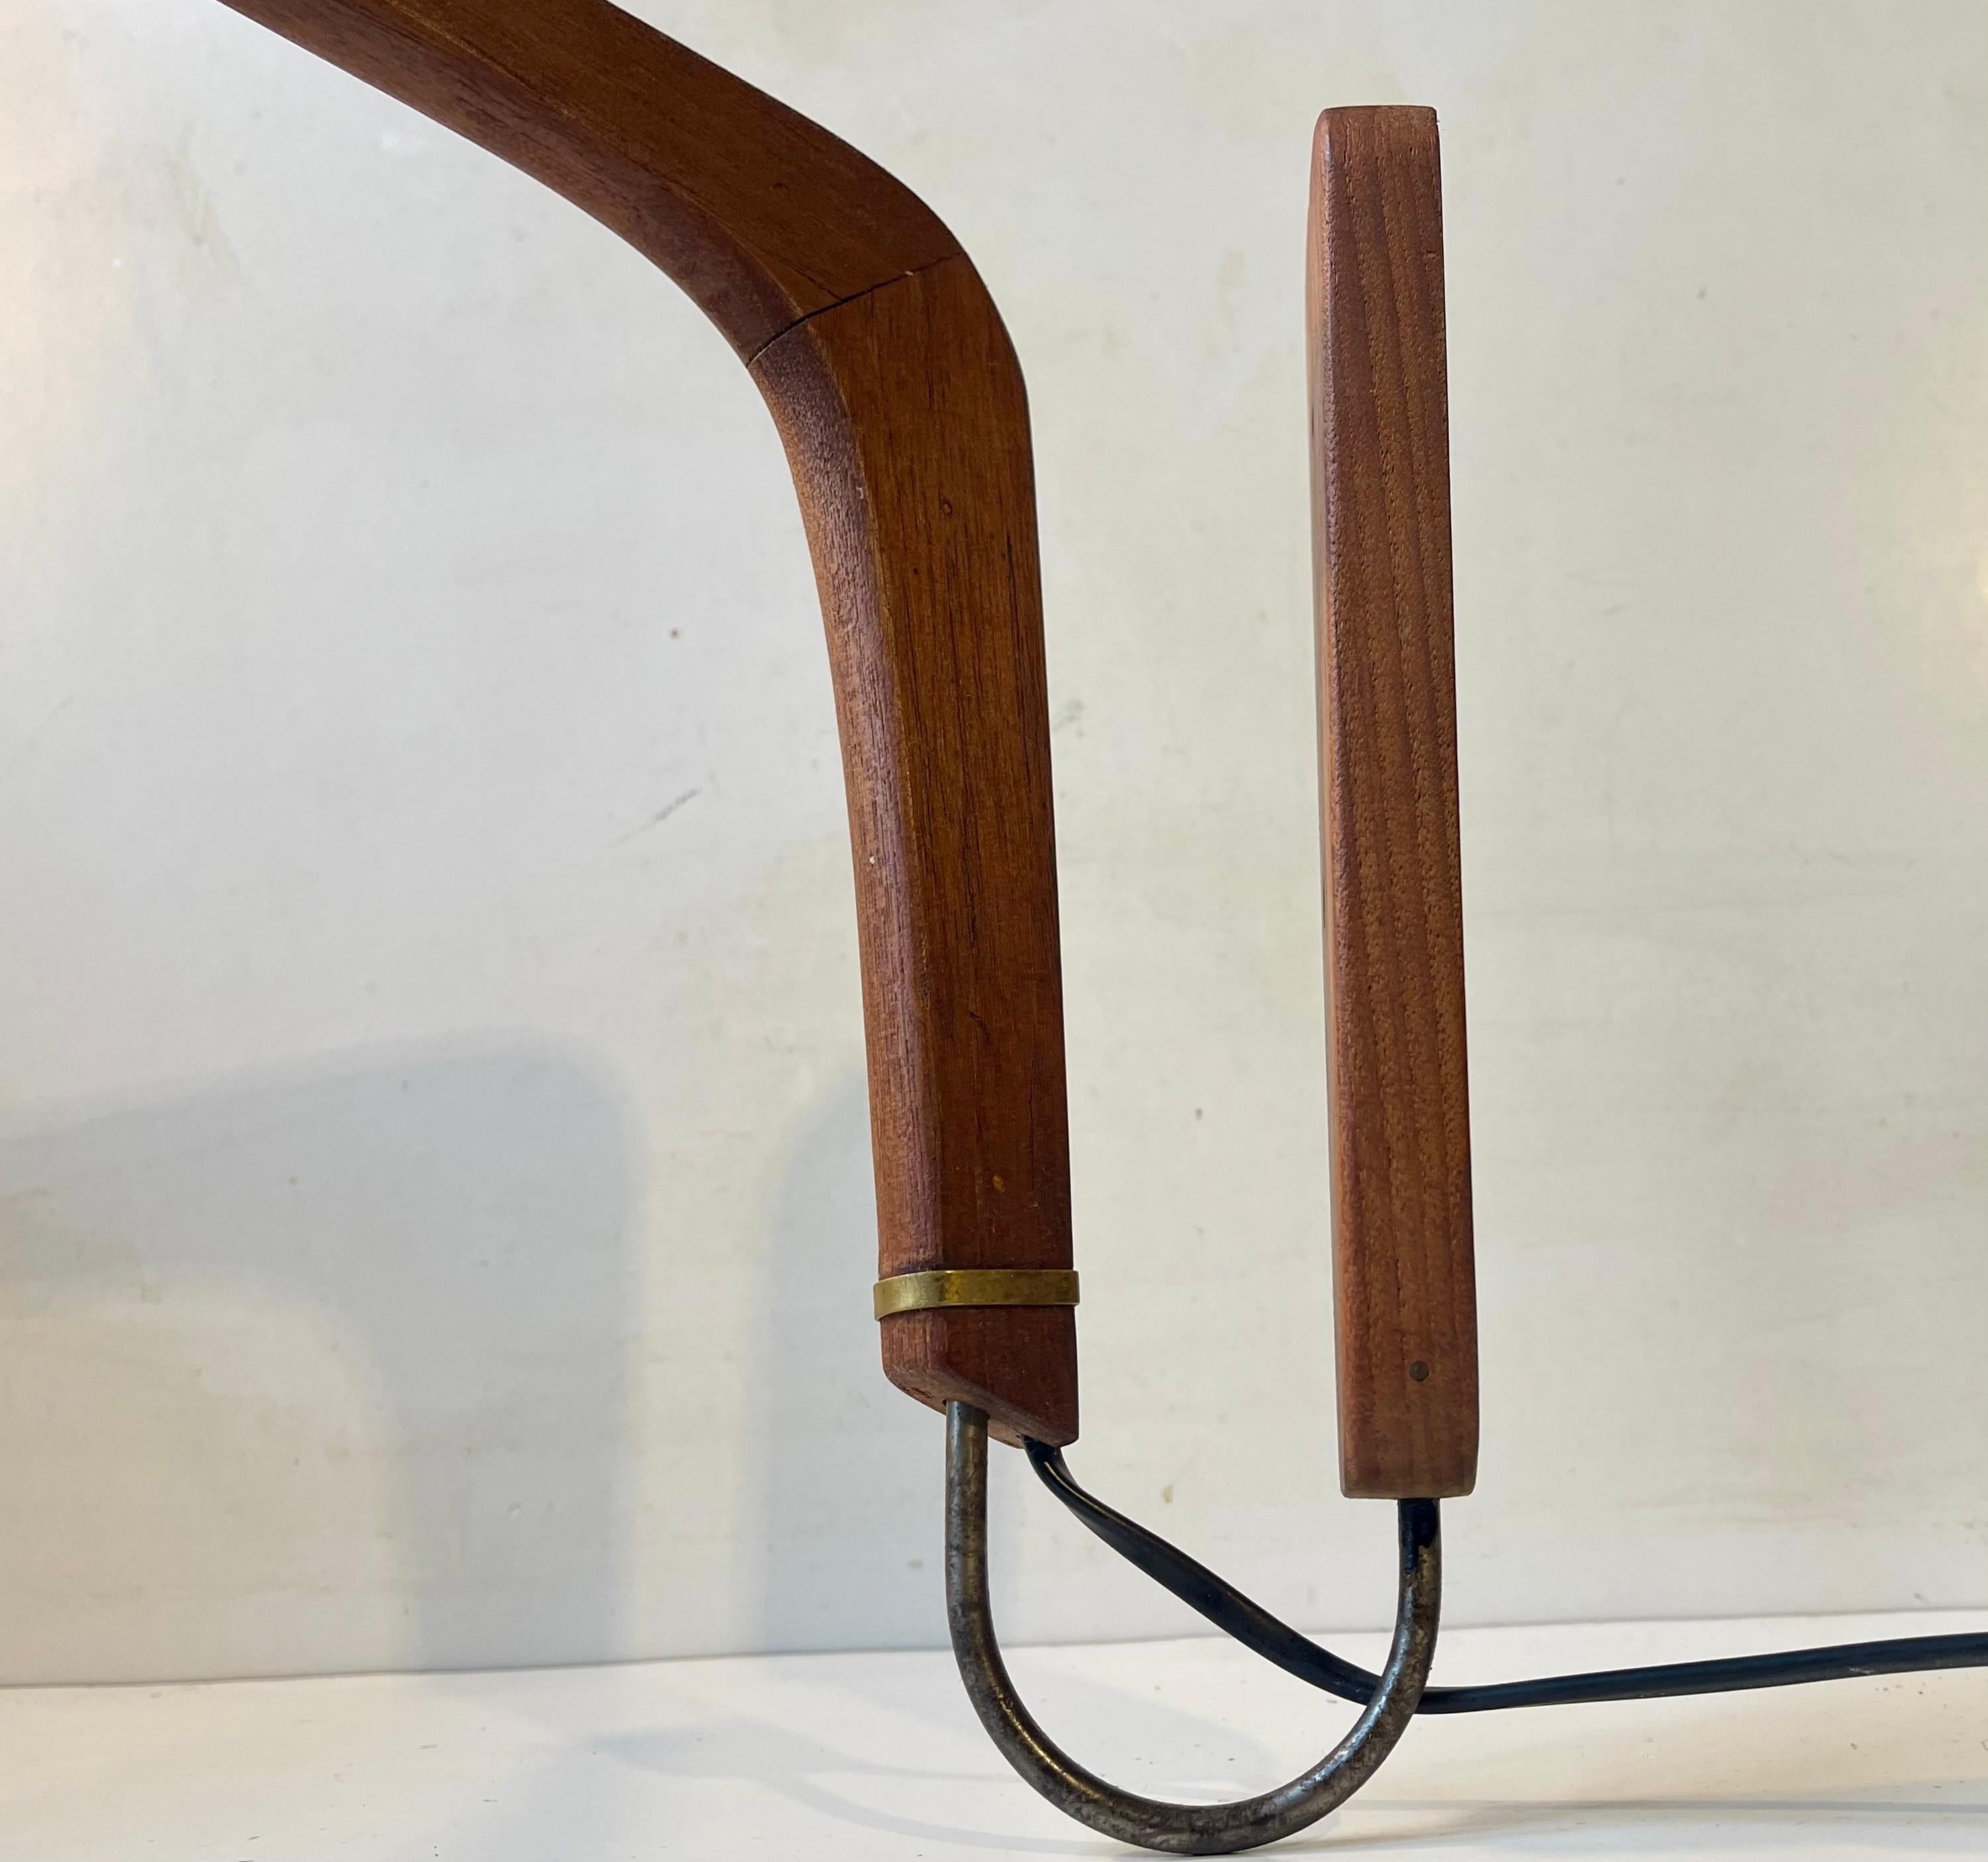 Mid-20th Century Svend Aage Holm Sørensen Large Articulated Wall Lamp in Teak and Brass, 1950s